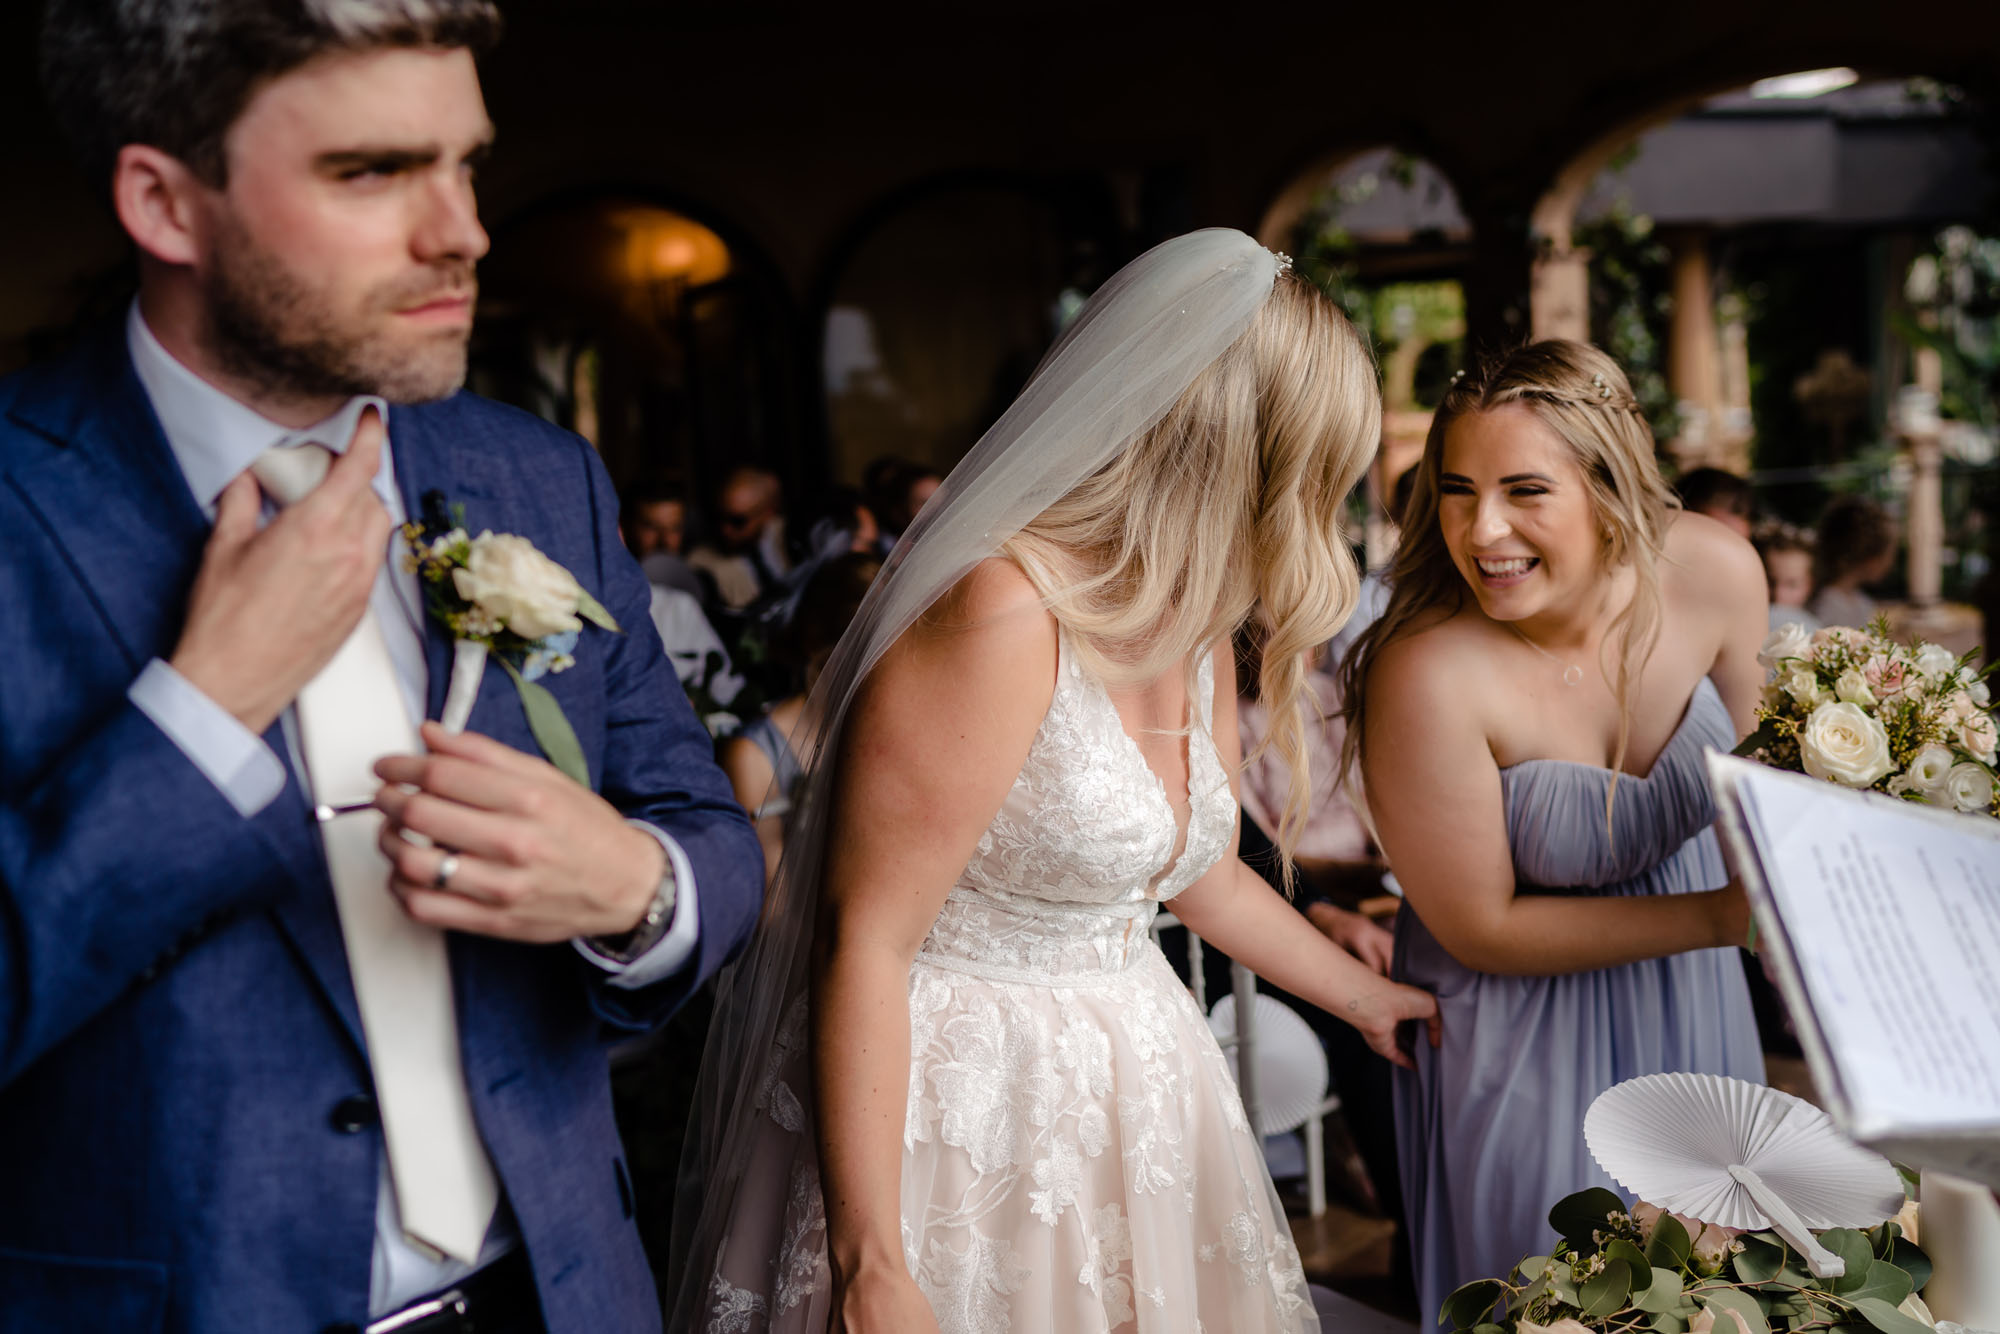 A bride chats to her bridesmaid while the groom by her side straightens his tie. By Liam Collard Photography